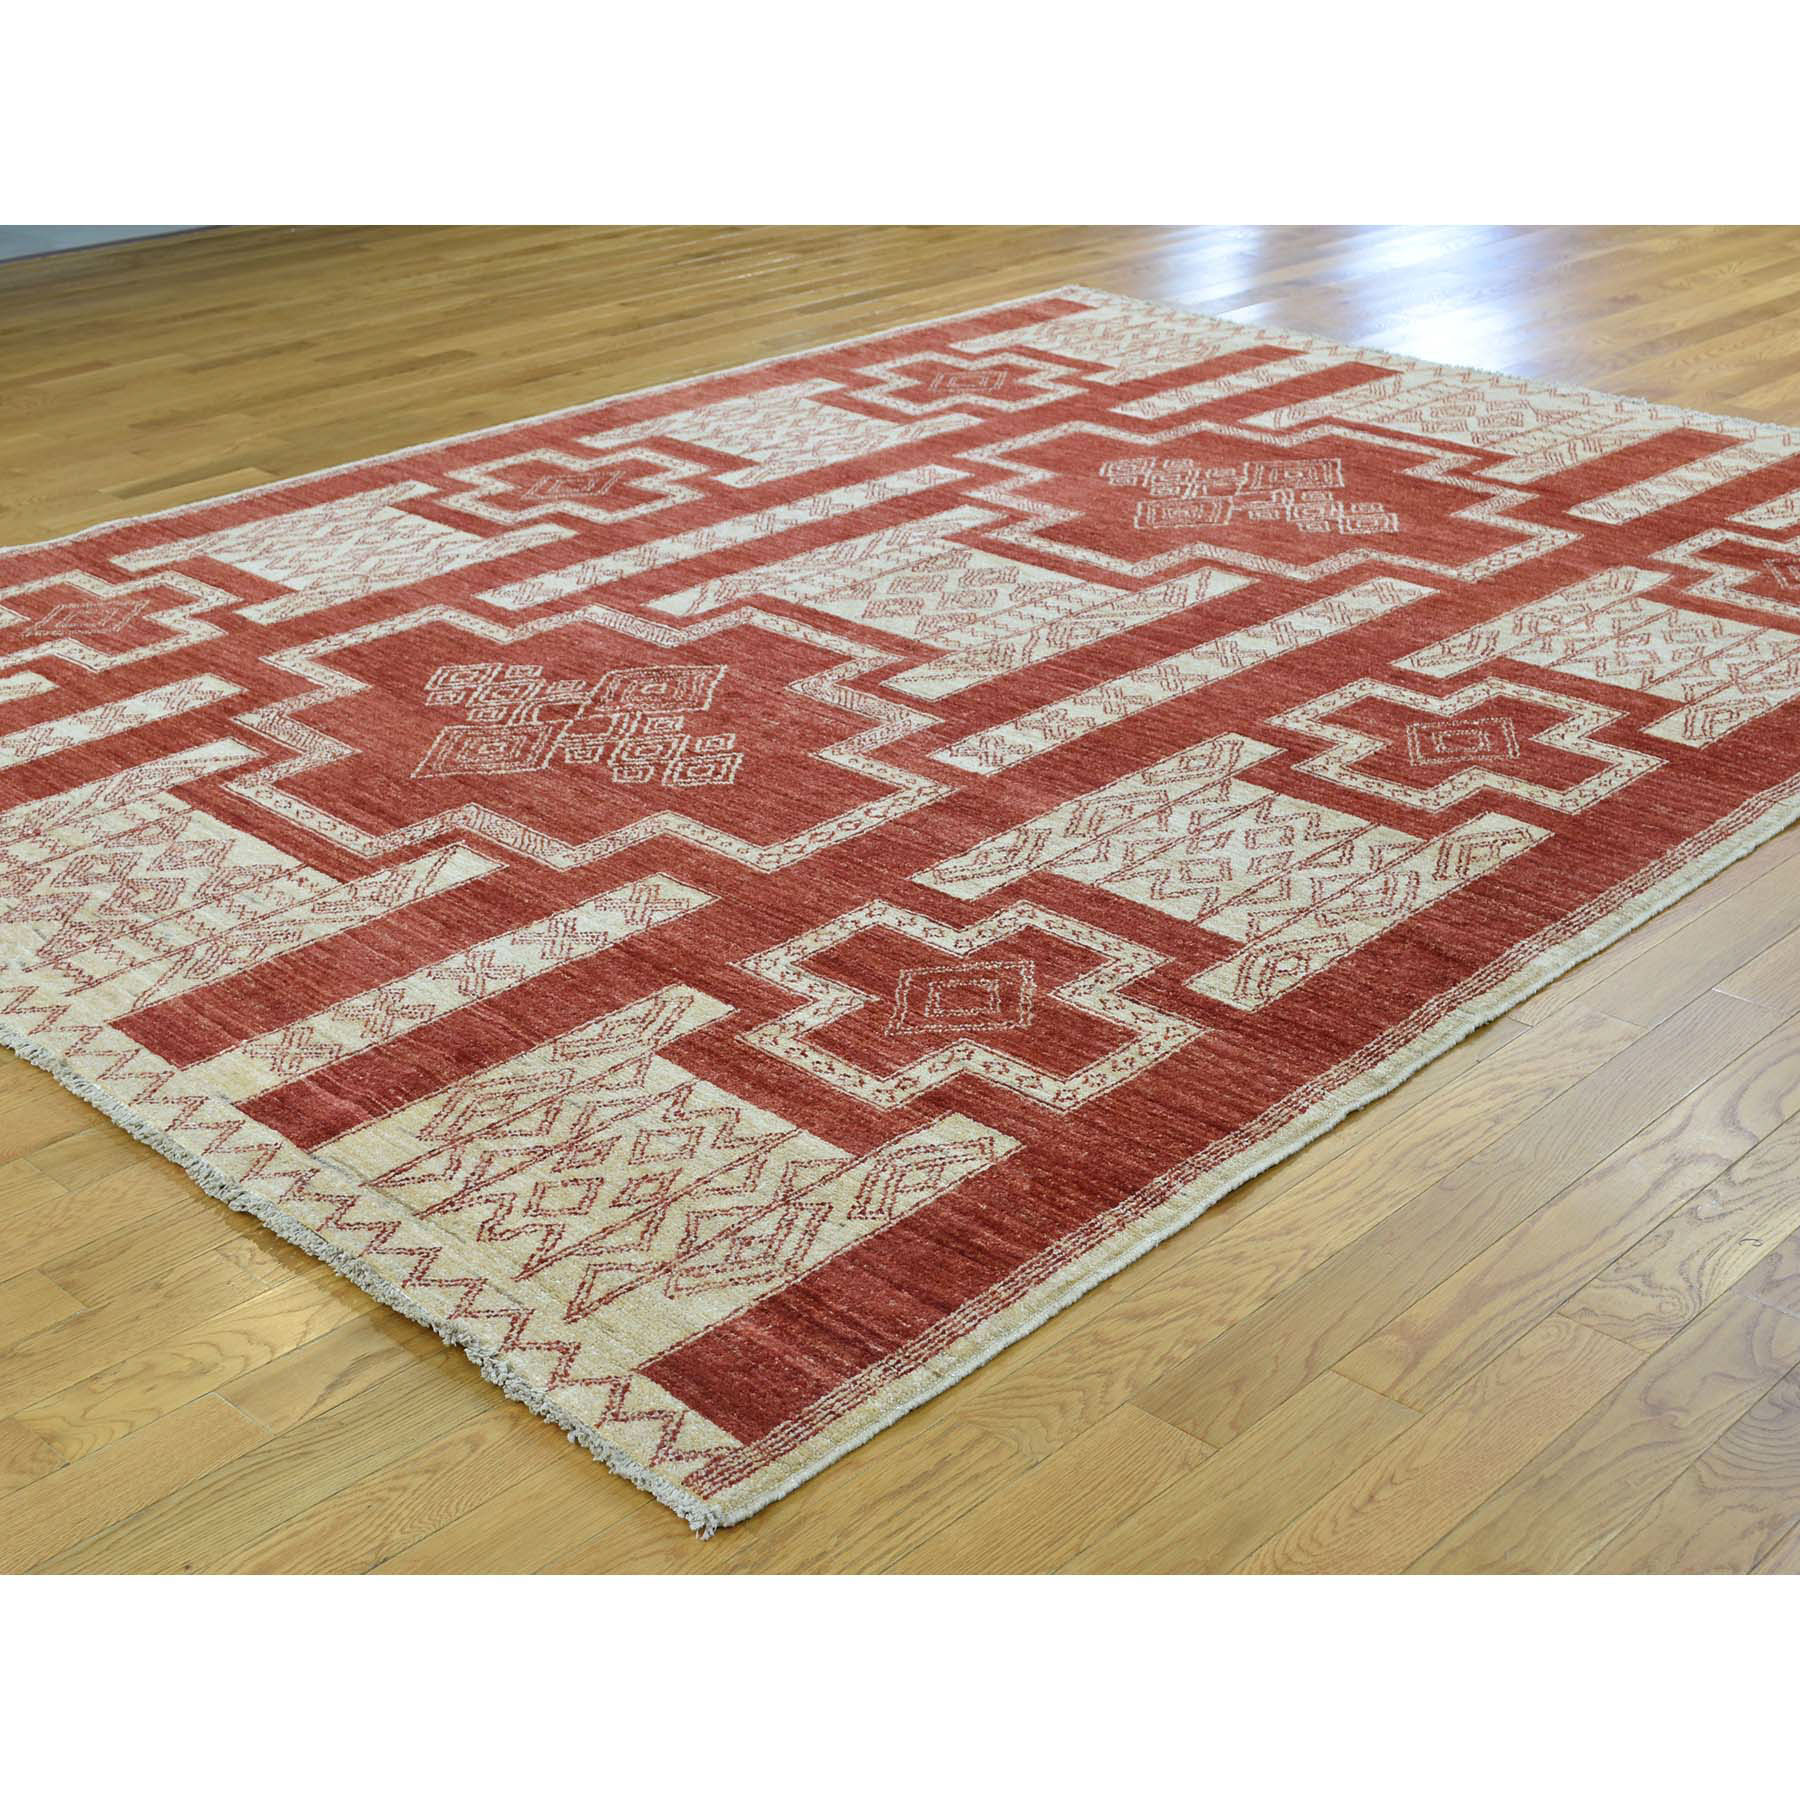 8-1 x10- Pure Wool Hand-Knotted Peshawar with Southwestern Motifs Rug 